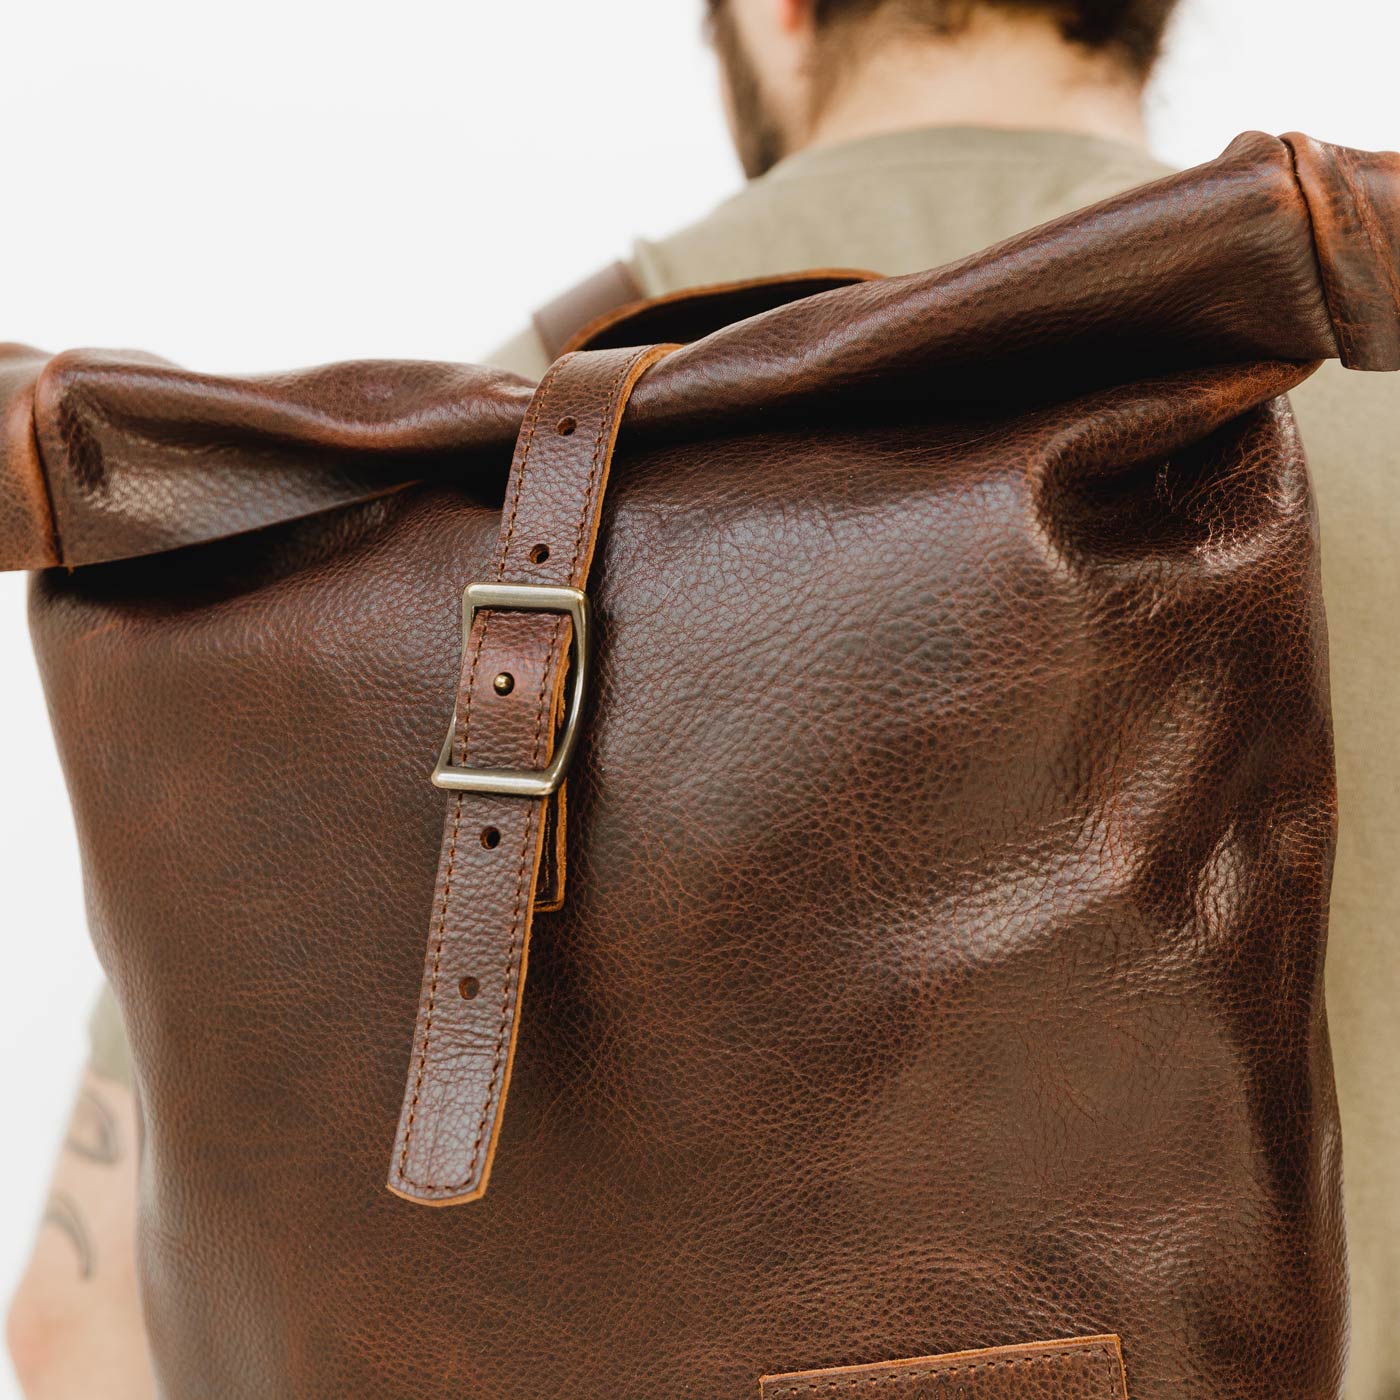 Backpack, Leather Backpack Man, Christmas, Leather Accessories for Men, Man  Bag